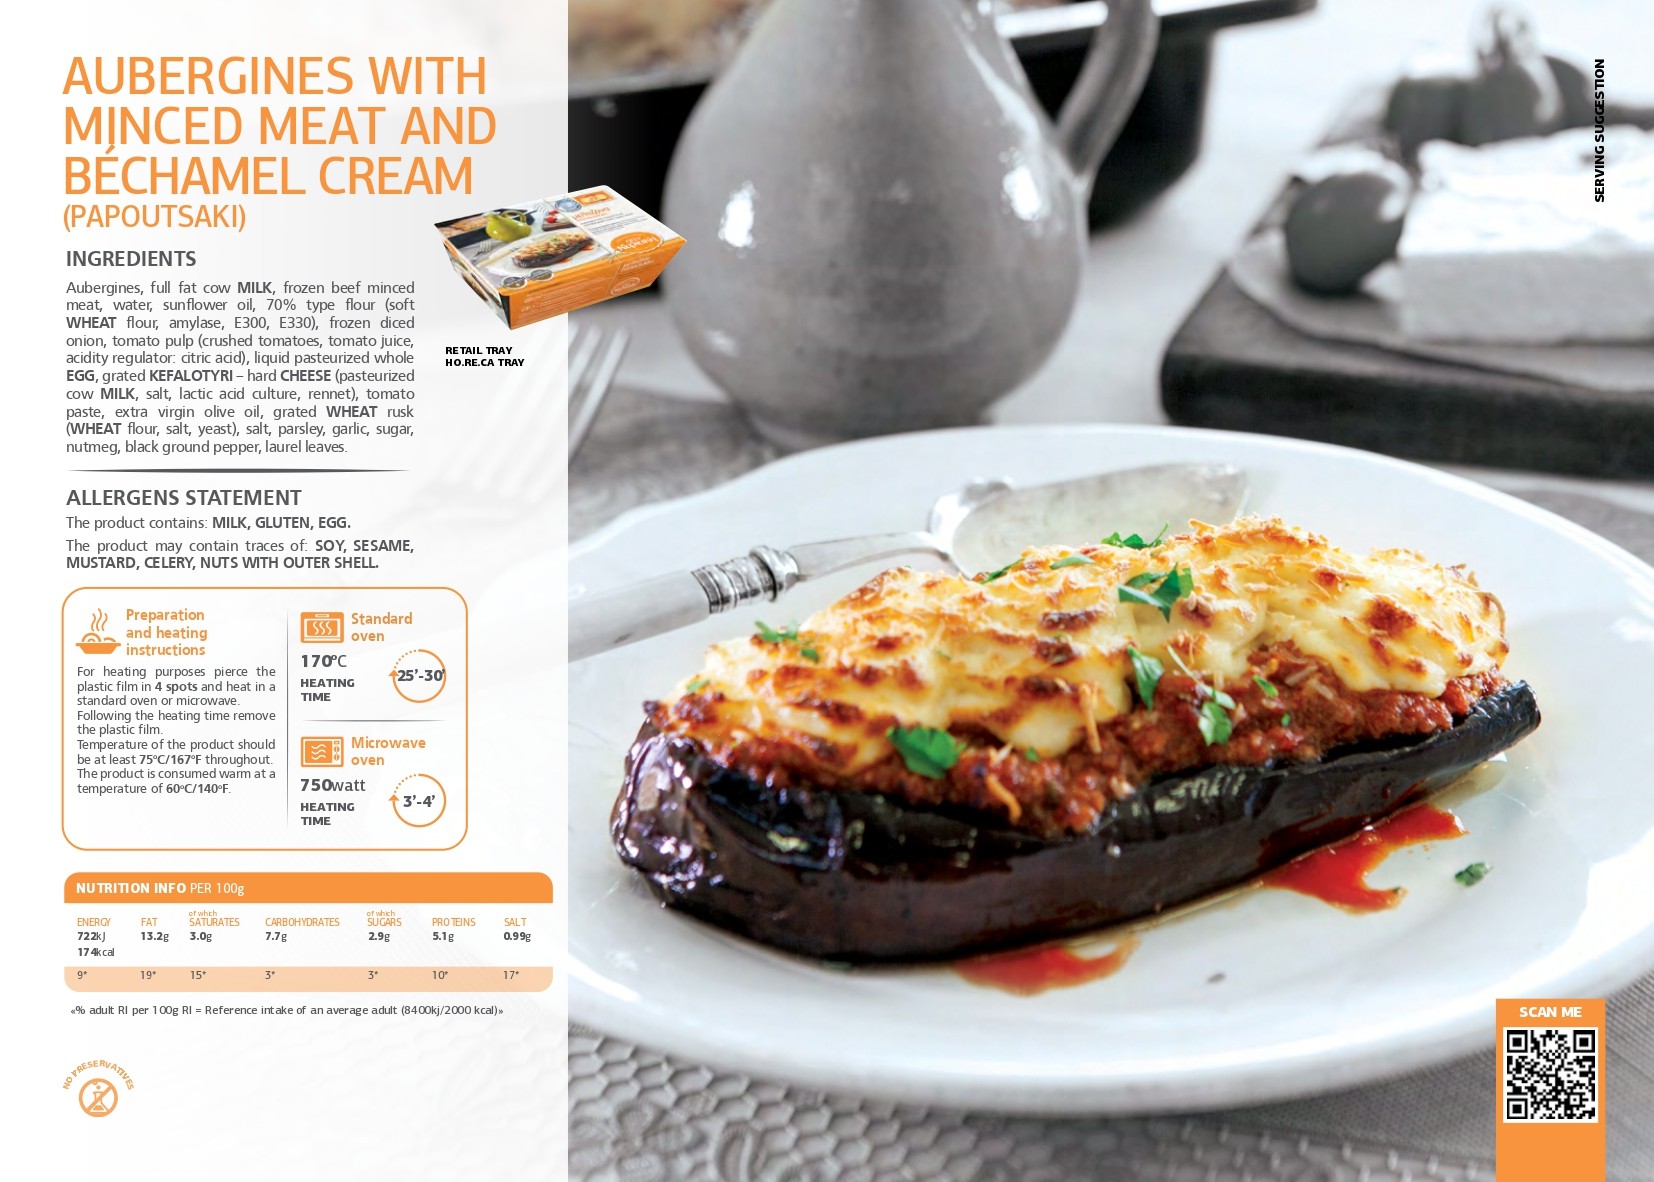 Aubergines with minced meat and bechamel cream pdf image